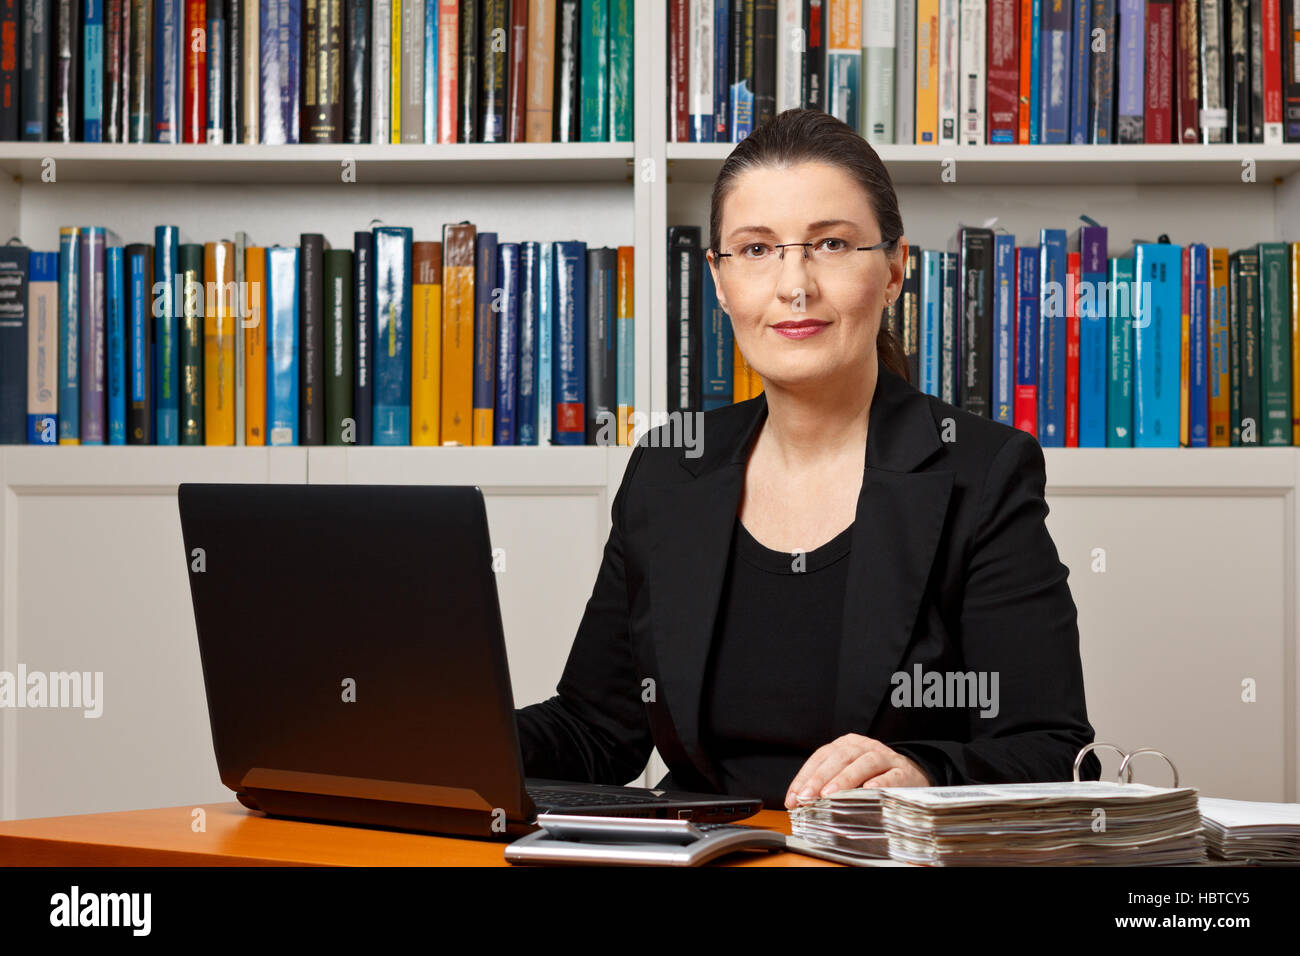 Mature woman in an office or library, tax or financial accountant, consultant, adviser or counselor Stock Photo